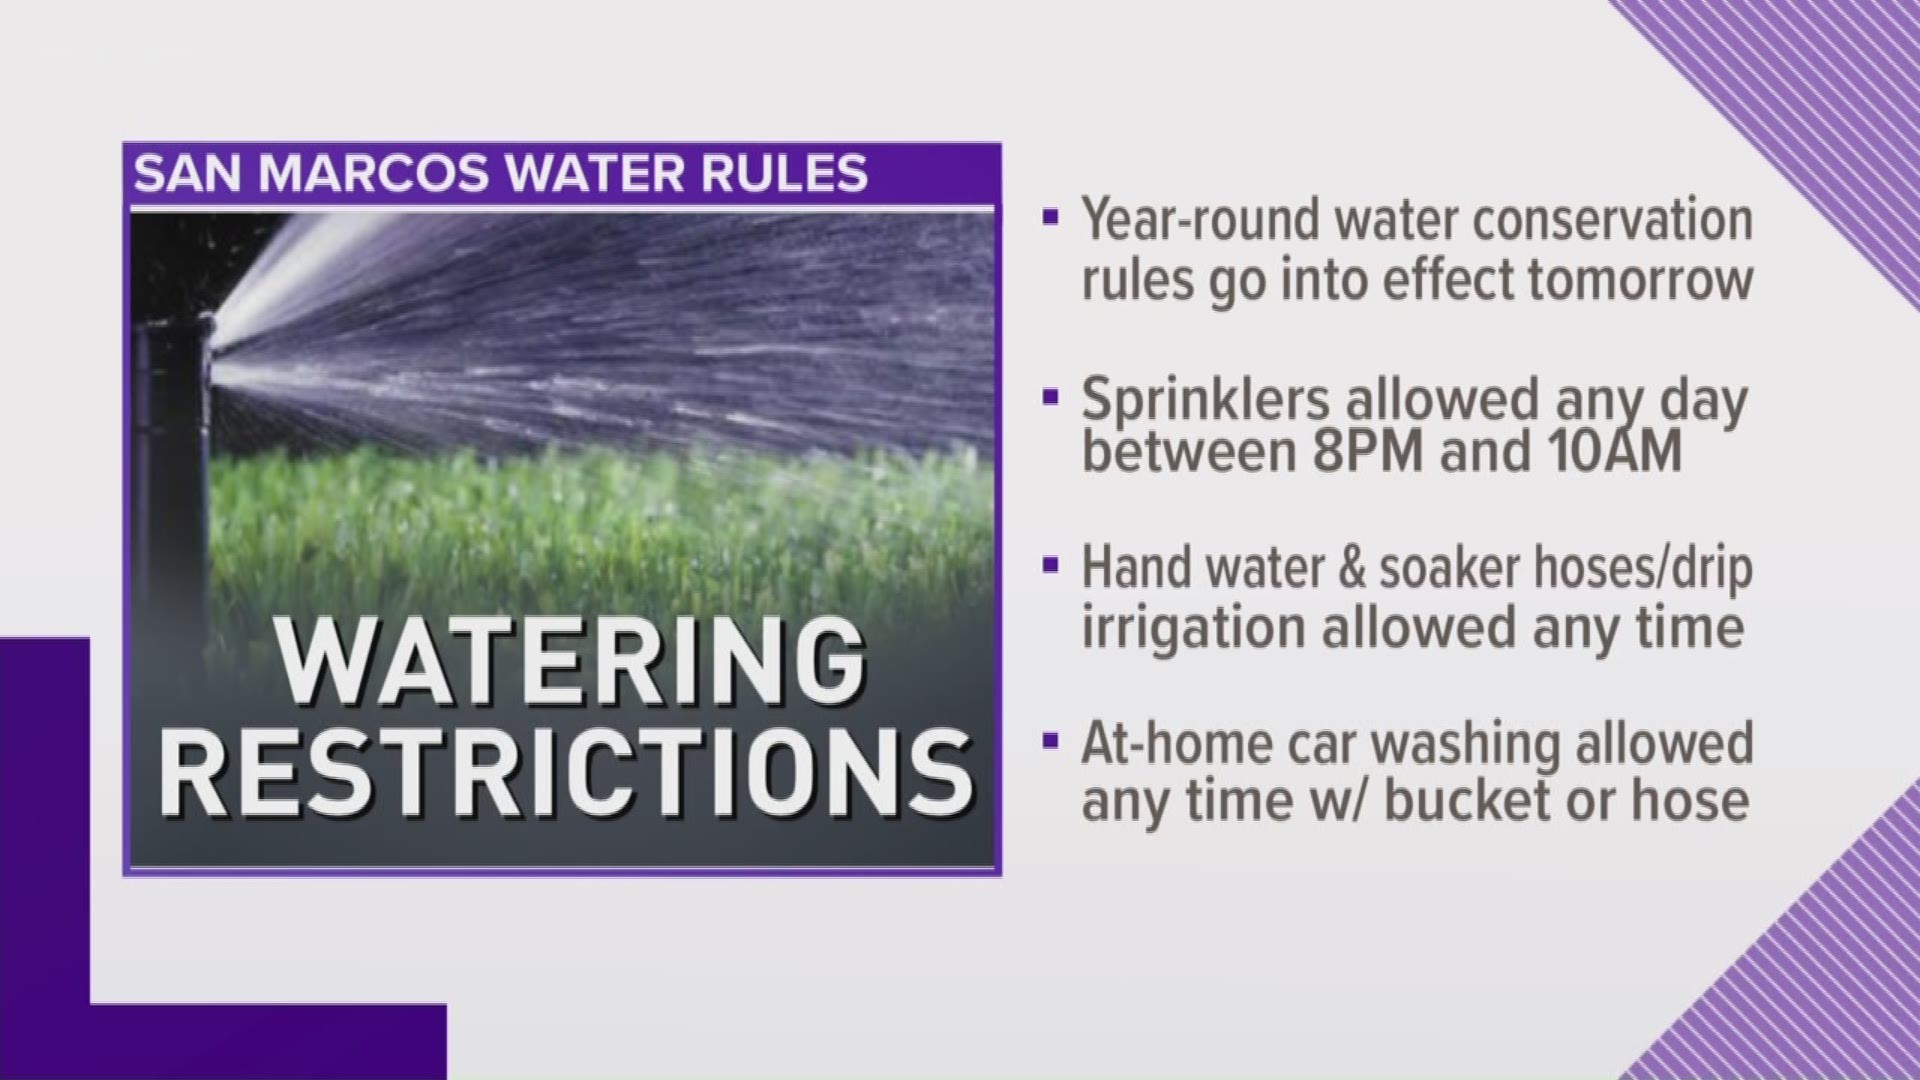 All the recent rain is allowing officials in San Marcos to ease-up on water restrictions.